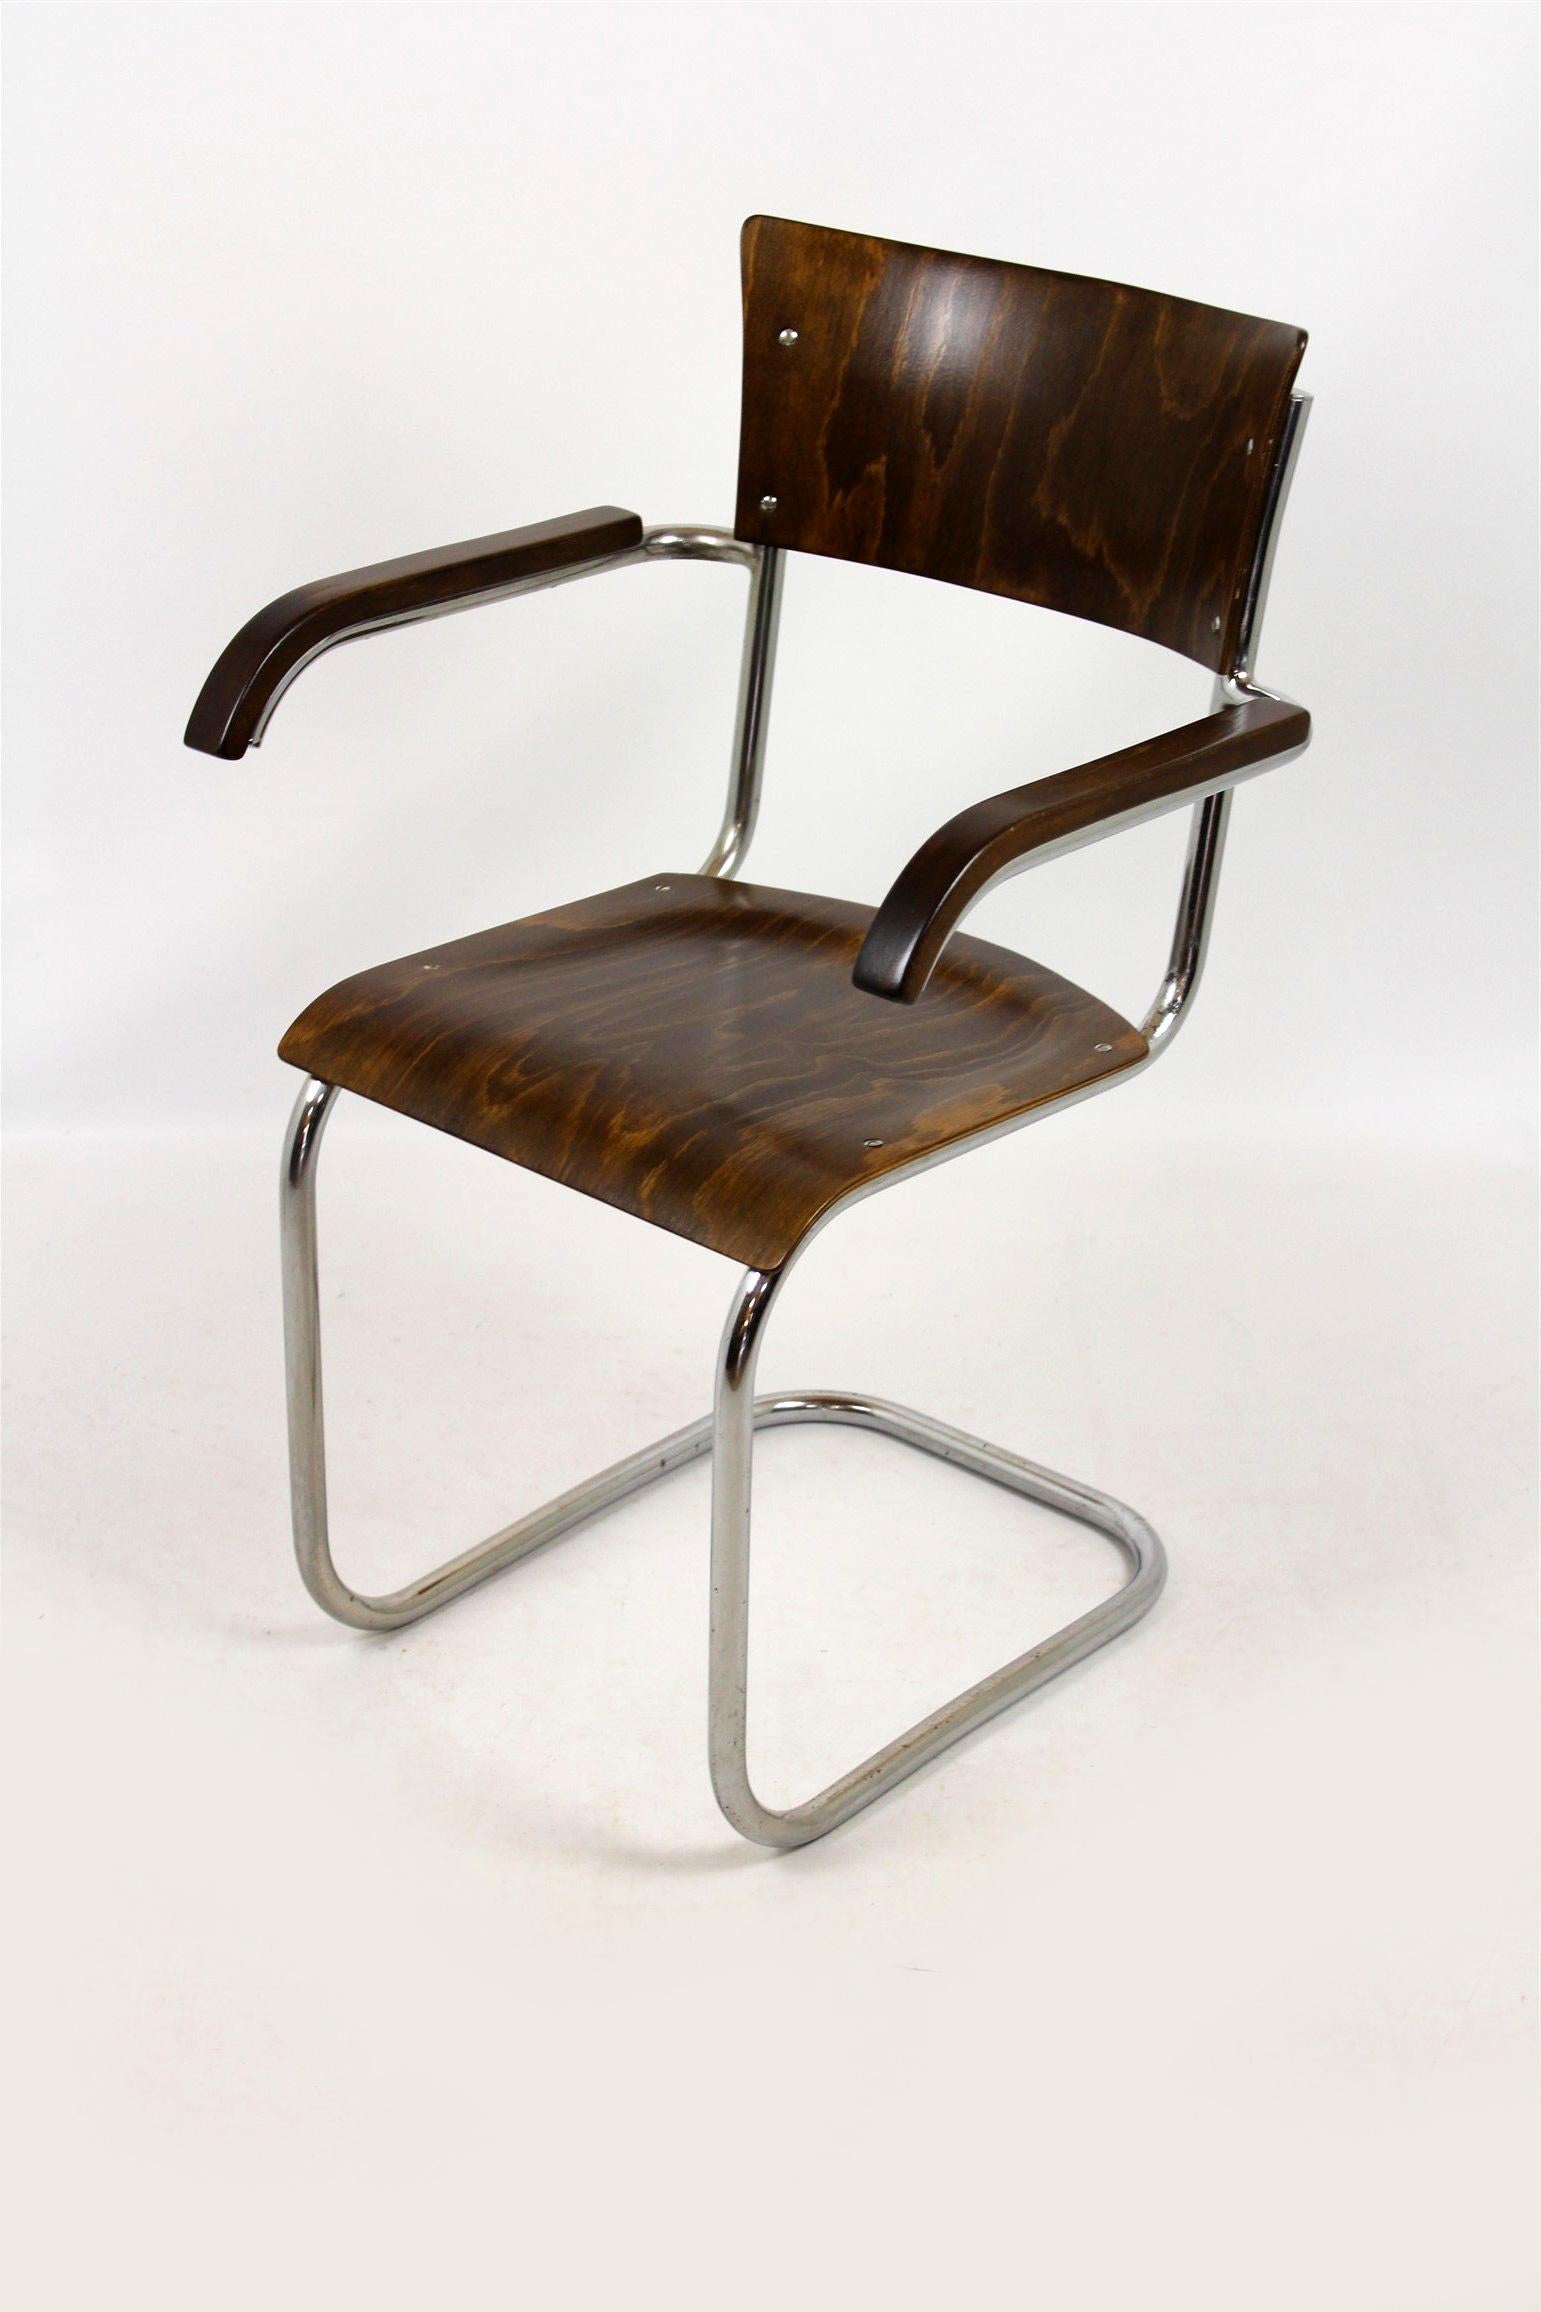 Fn 6 Cantilever Chair by Mart Stam for Mücke-Melder, 1930s For Sale 2